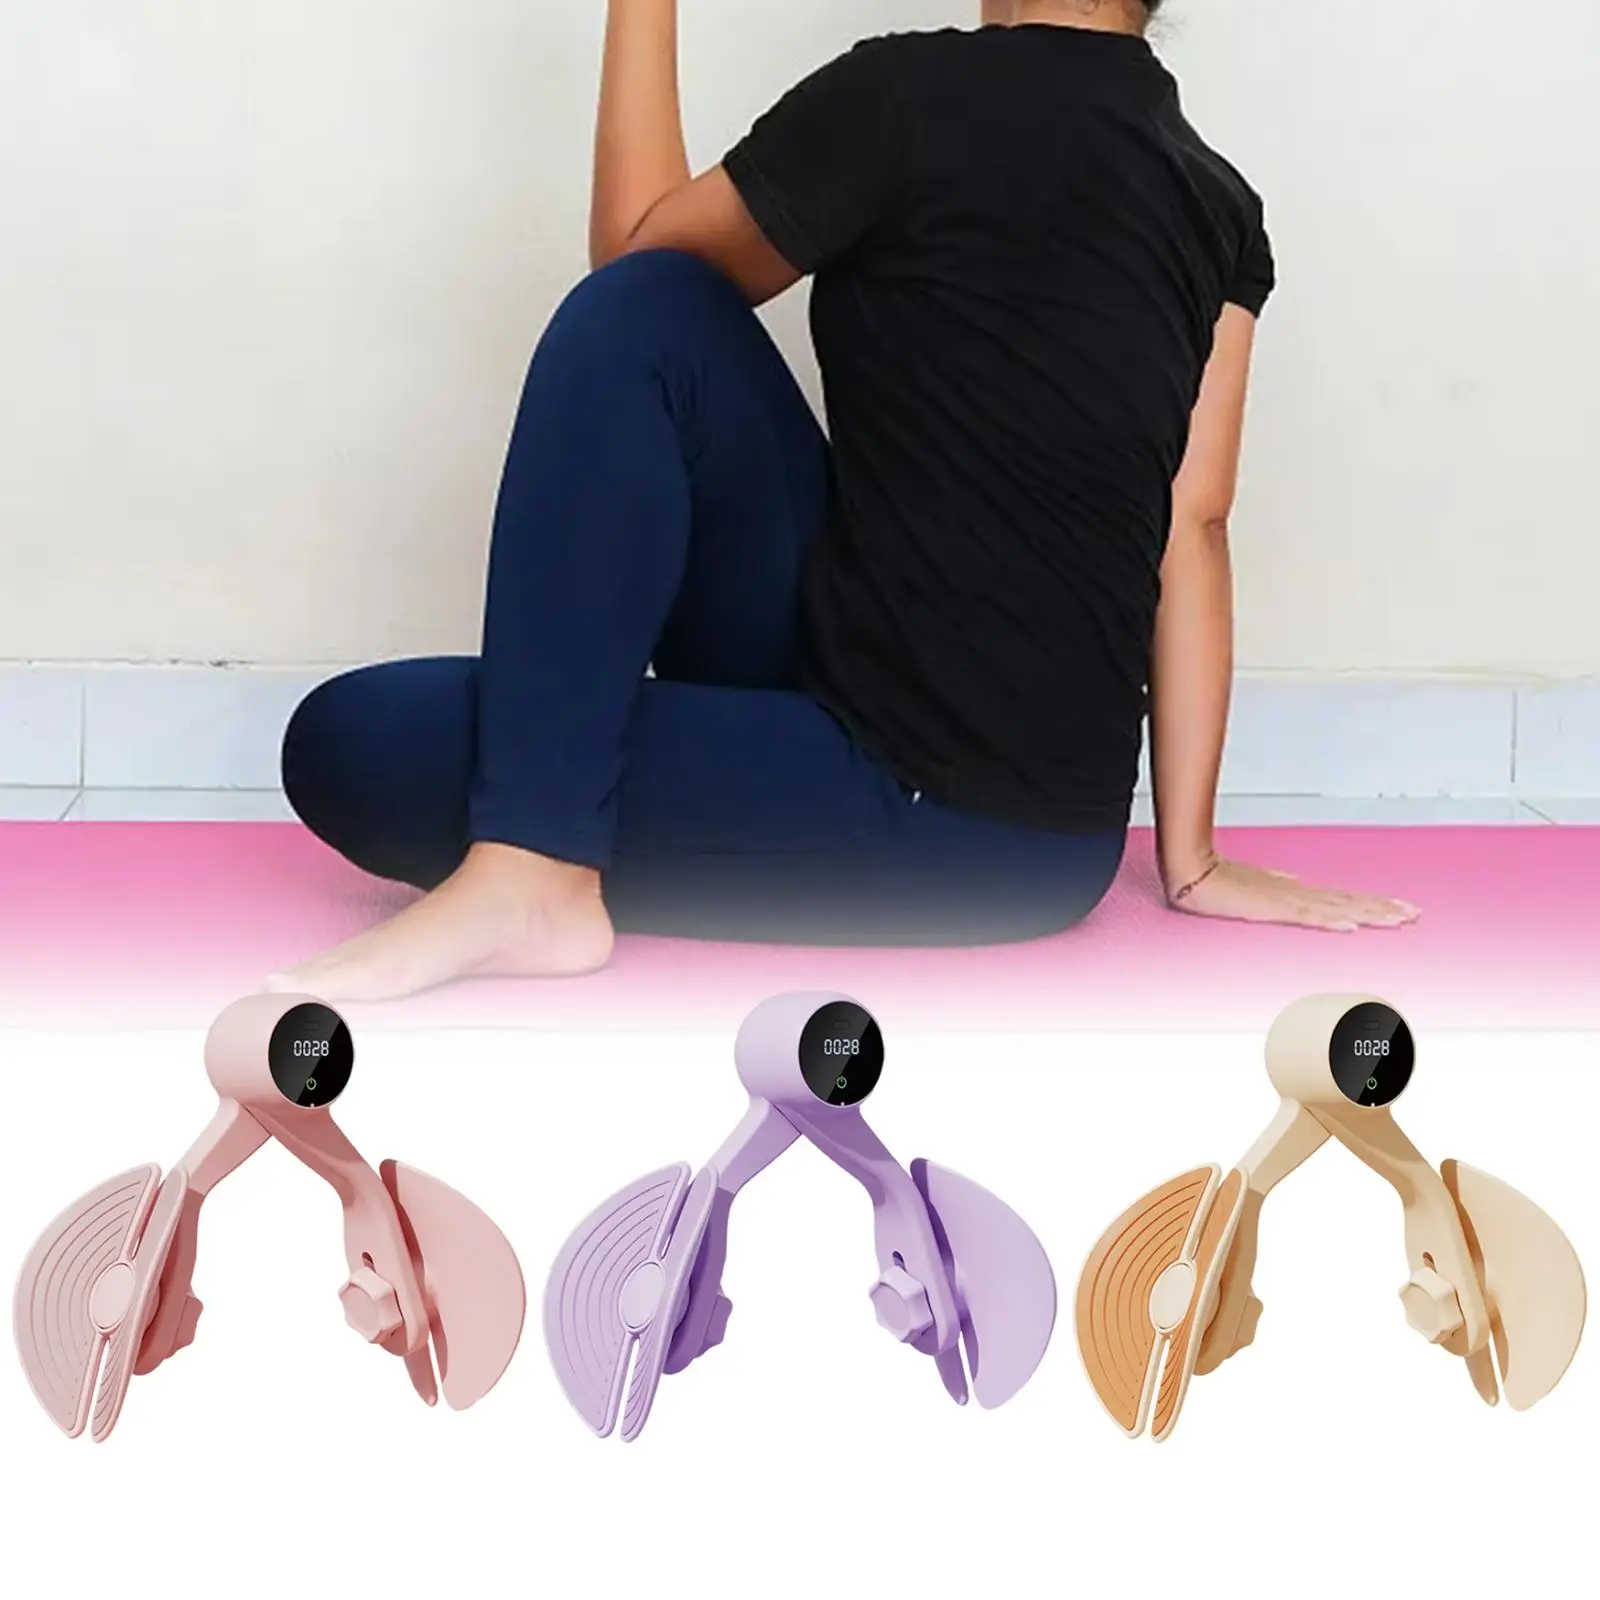 Thigh Exerciser with Counter Pelvis Floor Strengthening Device Fitness Tool Yoga